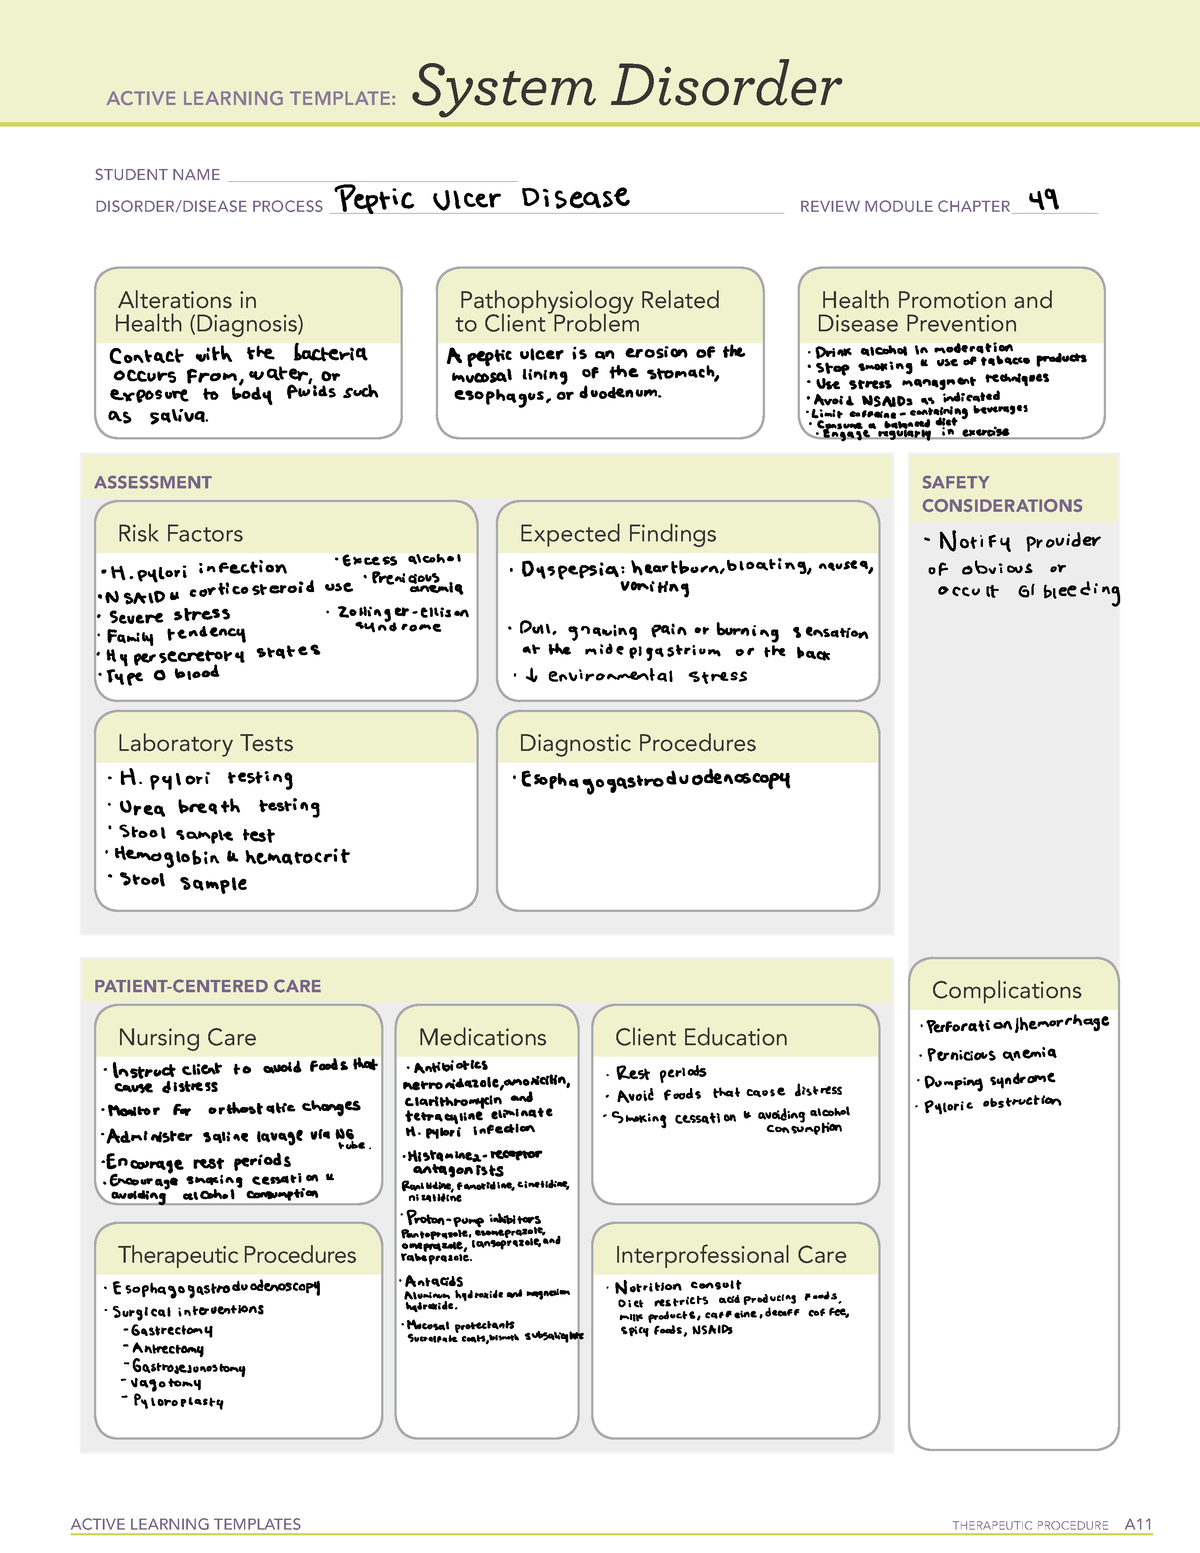 ATI Templates System disorder peptic ulcer - ACTIVE LEARNING TEMPLATES ...